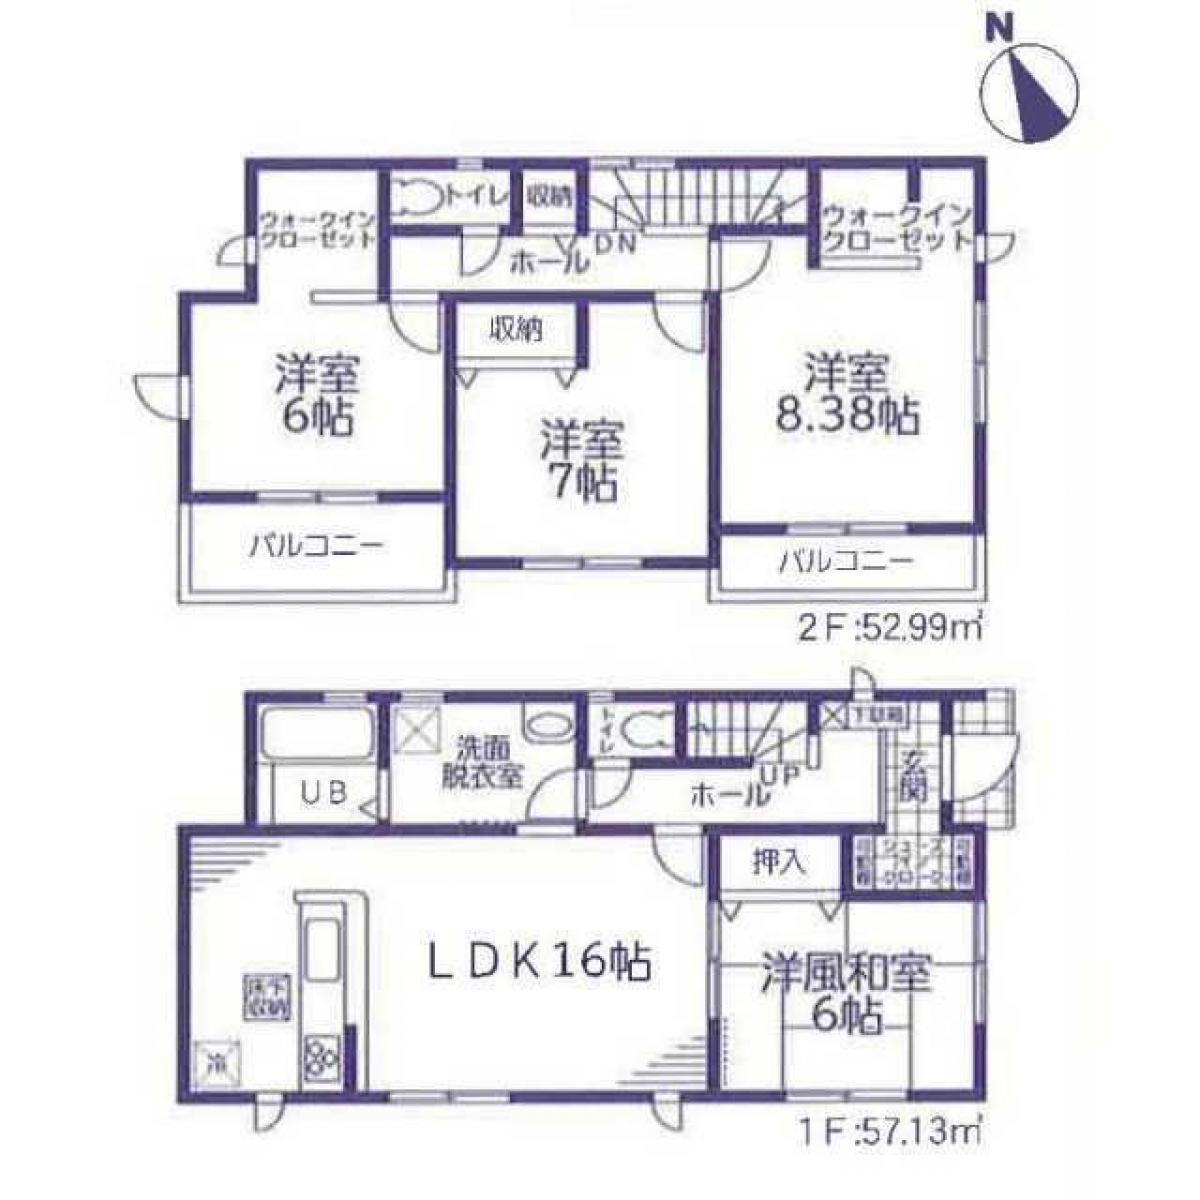 Picture of Home For Sale in Abiko Shi, Chiba, Japan